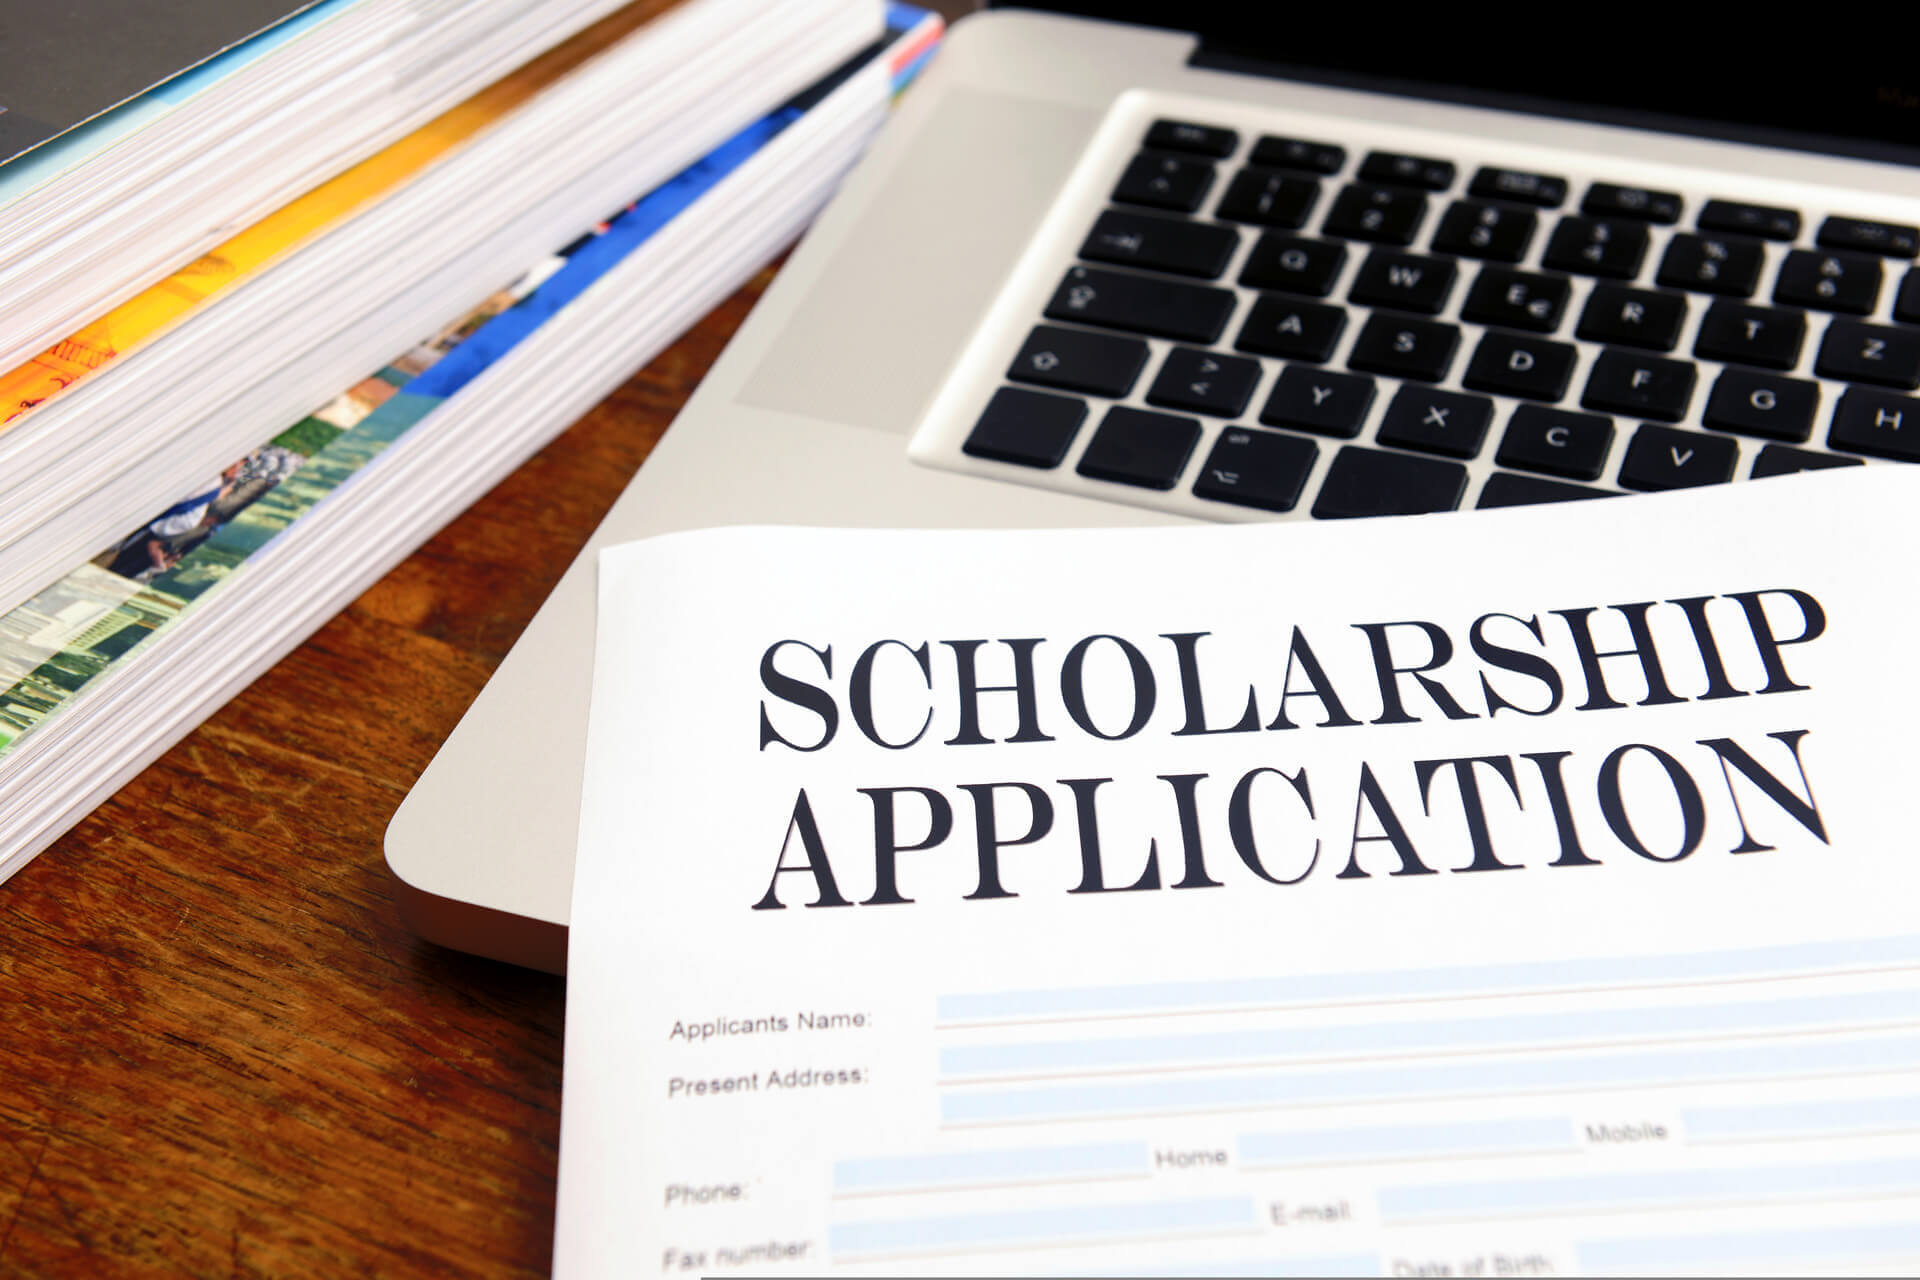 Scholarship opportunities at Springfield.